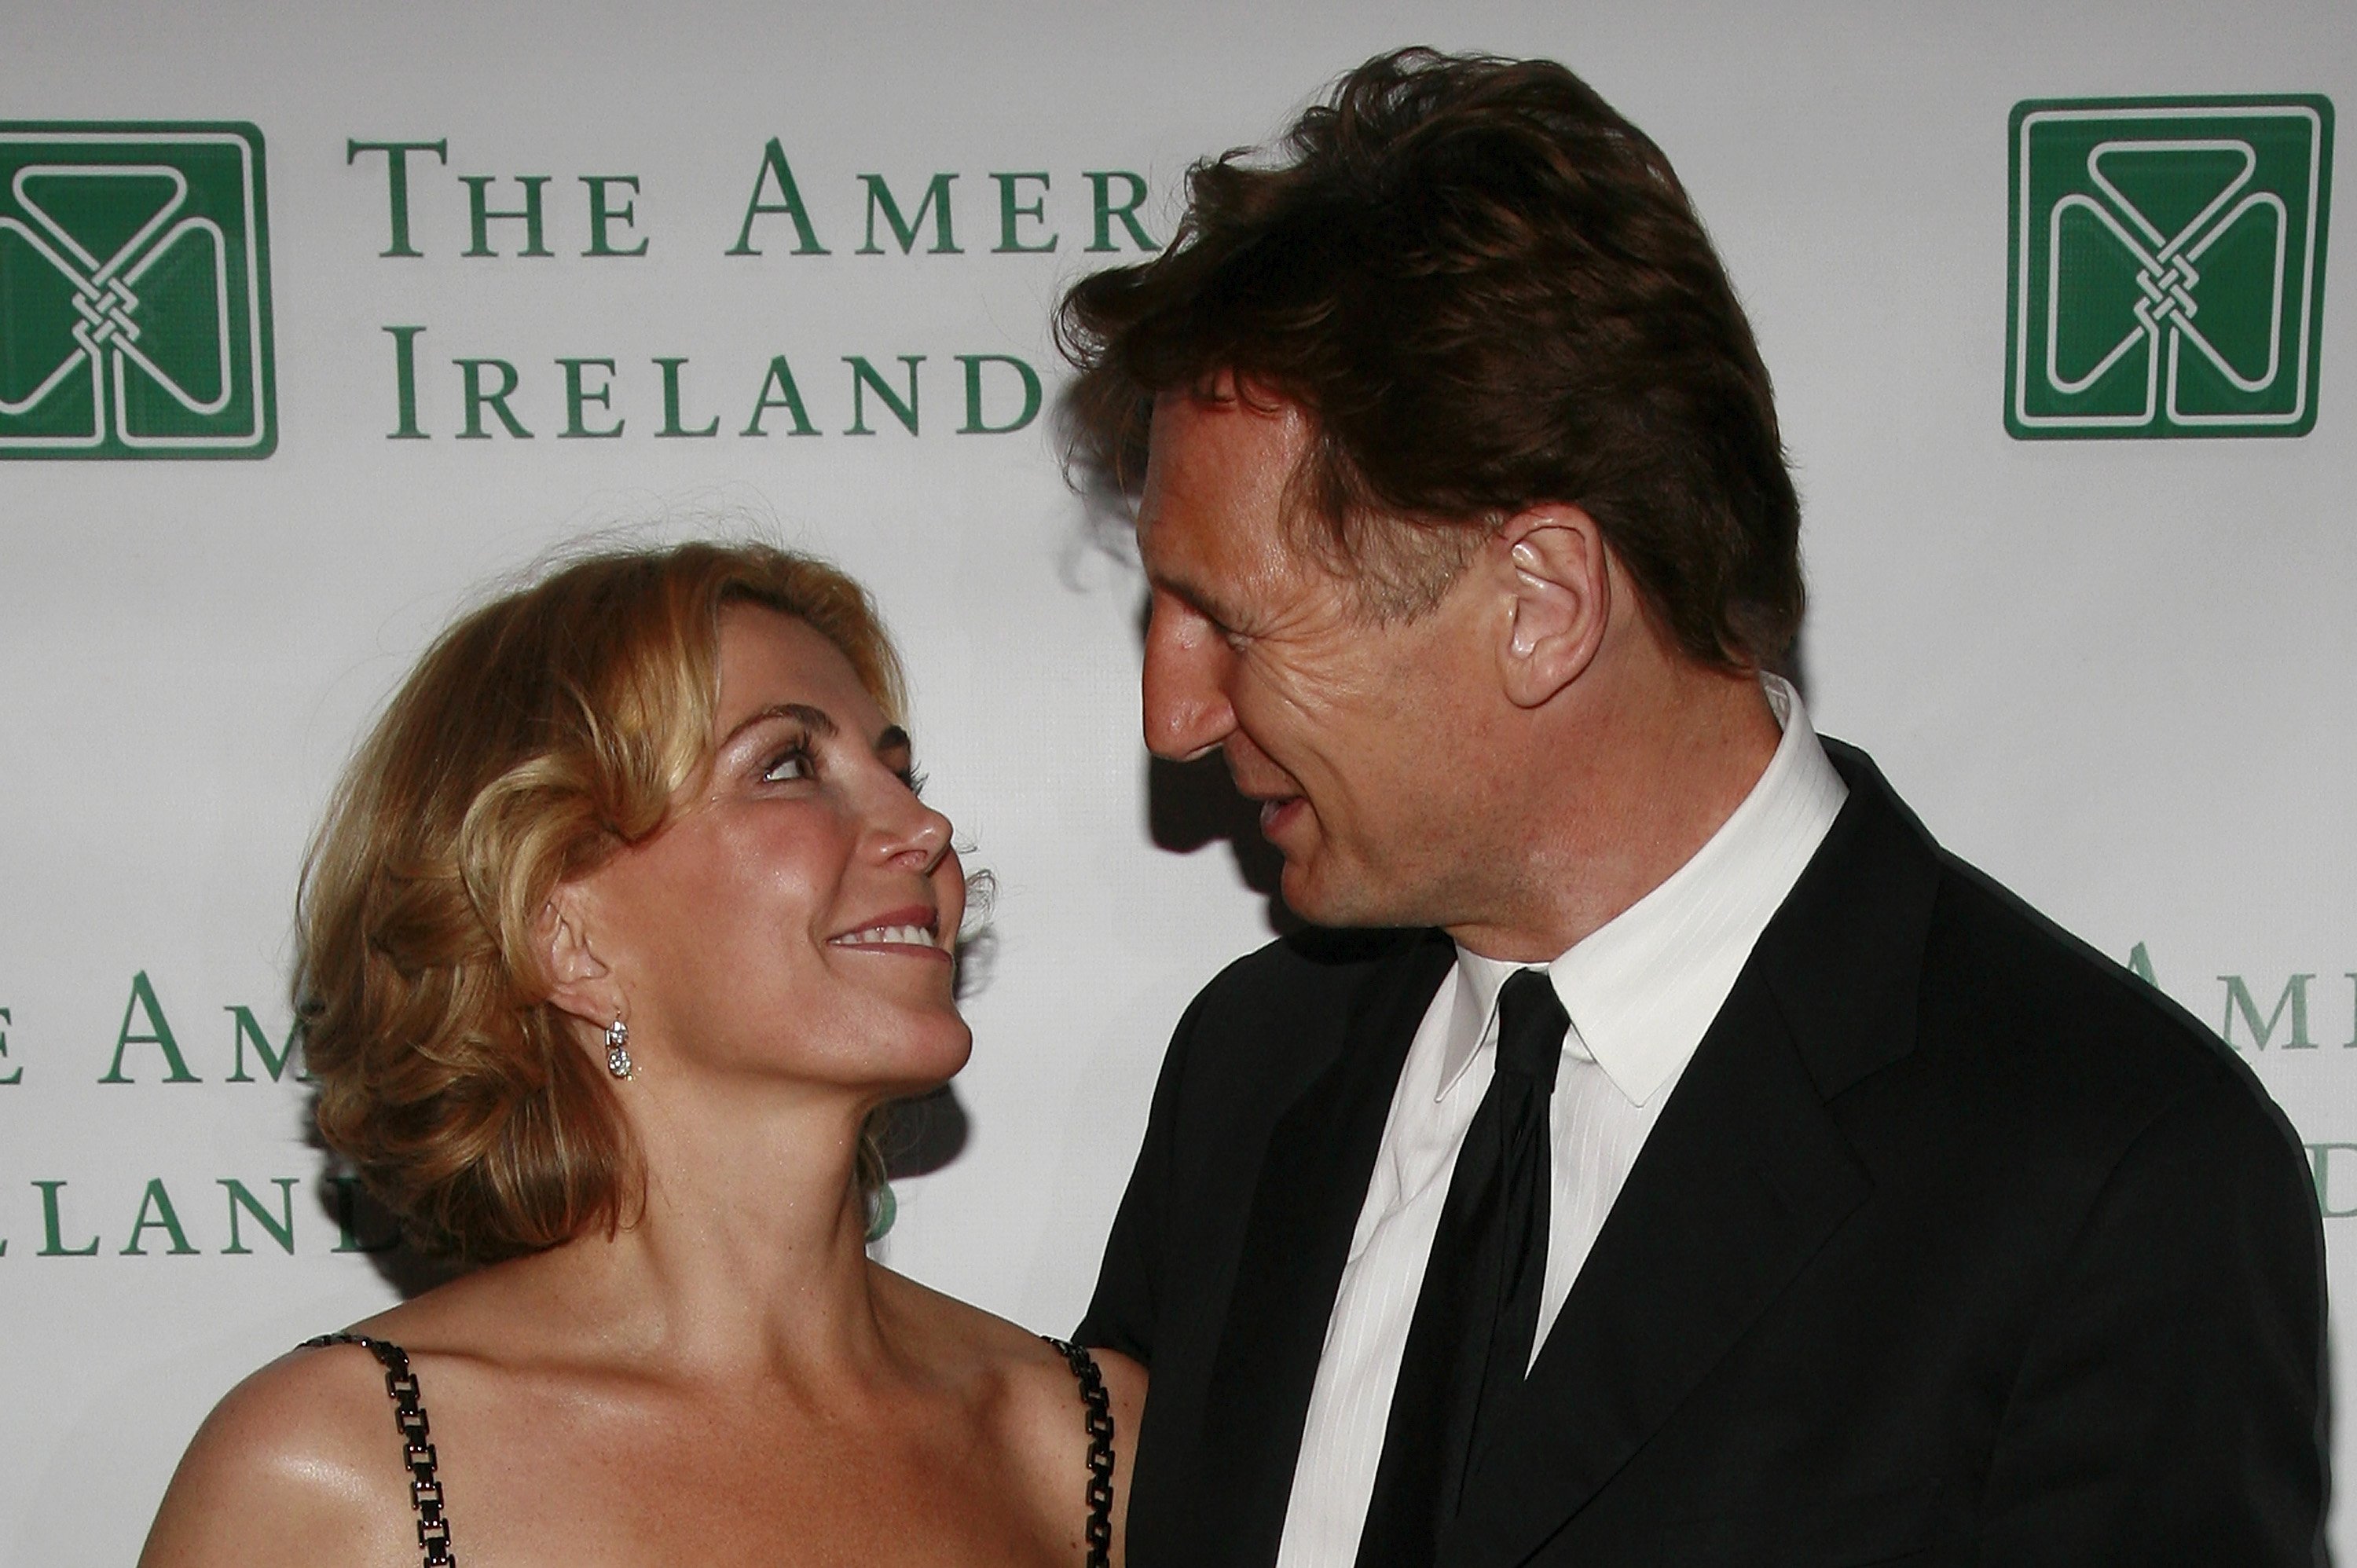 Natasha Richardson and actor Liam Neeson attend the American Ireland Fund's 33rd Annual New York Gala Fundraiser at The Tent at Lincoln Center on May 8, 2008. | Source: Getty Images